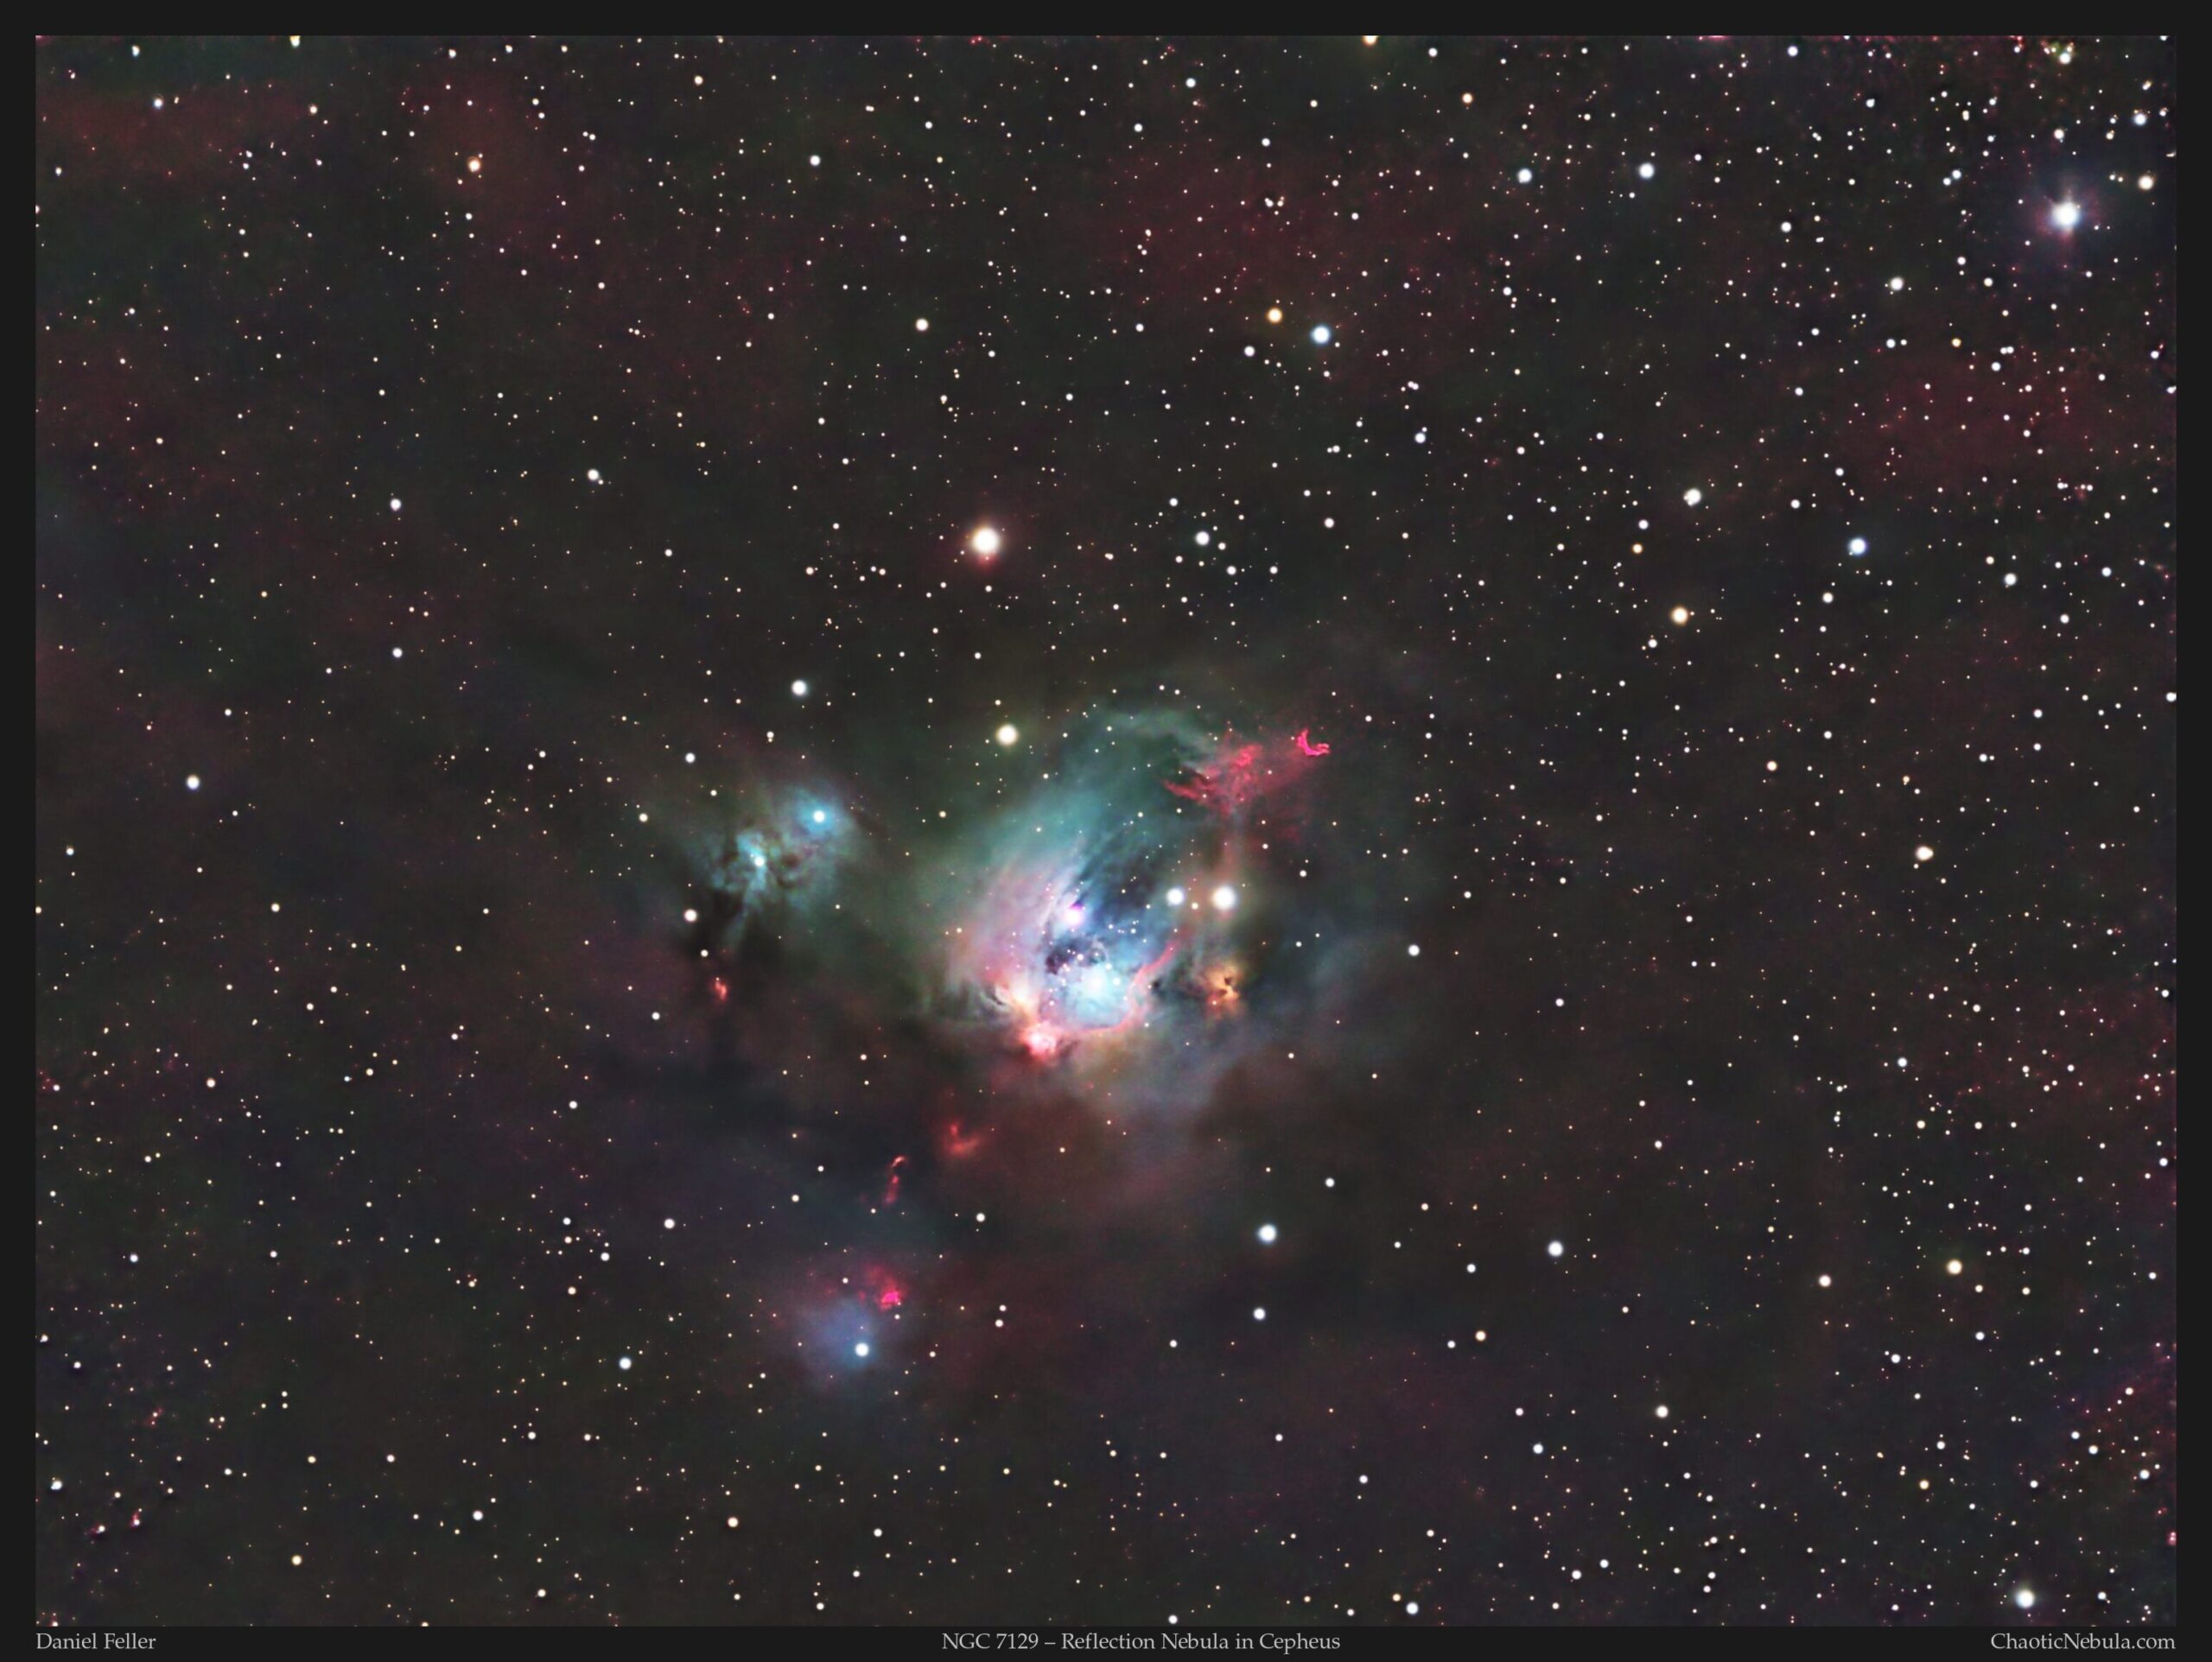 See How to Photograph a Reflection Nebula in Cepheus (NGC 7129)